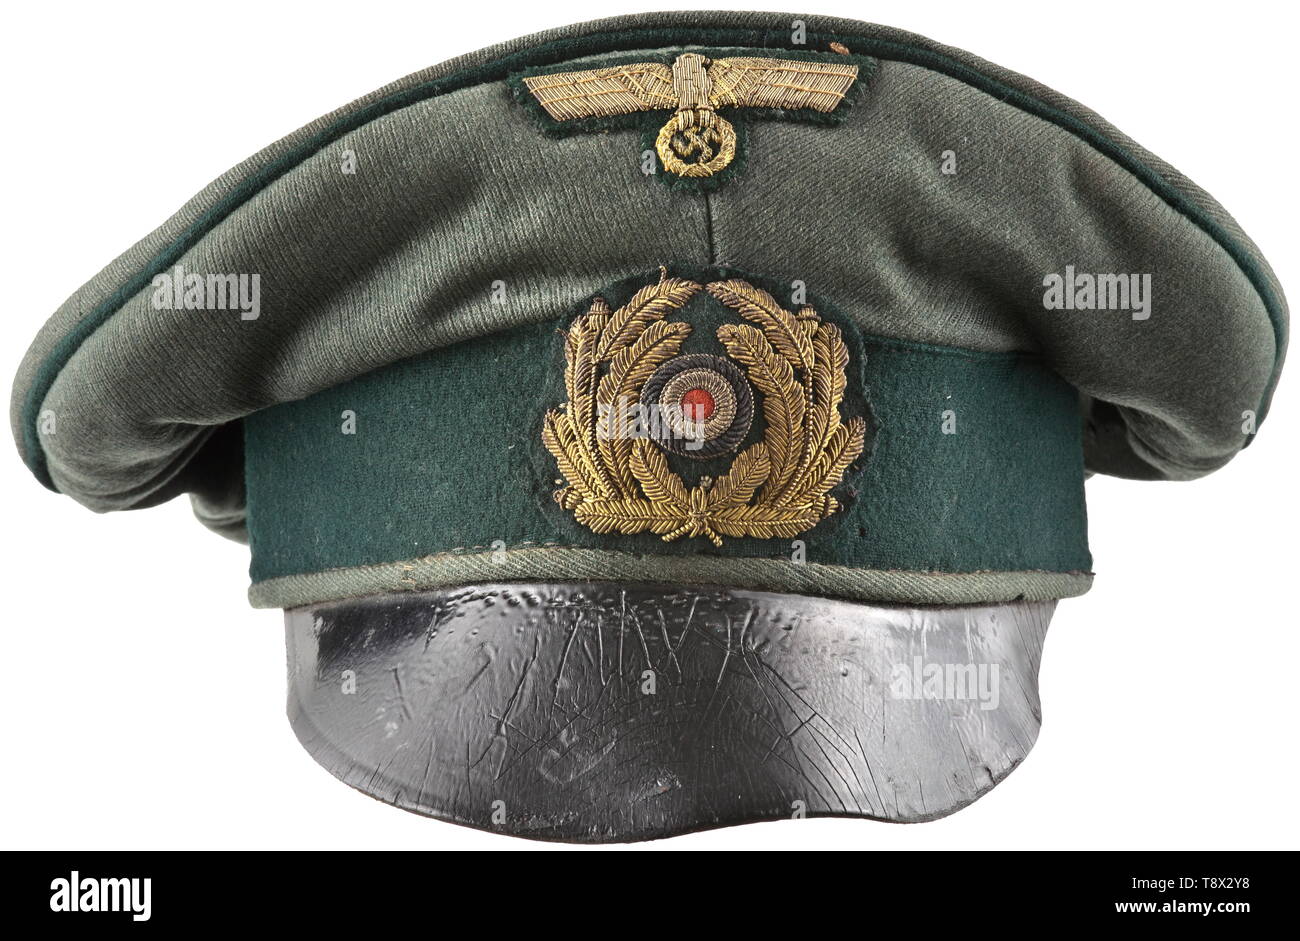 An old style field cap for officers of coastal artillery Cap body of field-grey cloth, dark-green trim band and piping, navy-blue inner liner (damaged cap trapezoid with name tag 'Kißing'), dark-brown leather sweatband, the visor of soft, black lacquered leather. Hand-embroidered cap insignia in gilt tinsel thread. A heavily used cap with signs of age and moth traces. historic, historical, navy, naval forces, military, militaria, branch of service, branches of service, armed forces, armed service, object, objects, stills, clipping, clippings, cut out, cut-out, cut-outs, 20t, Editorial-Use-Only Stock Photo